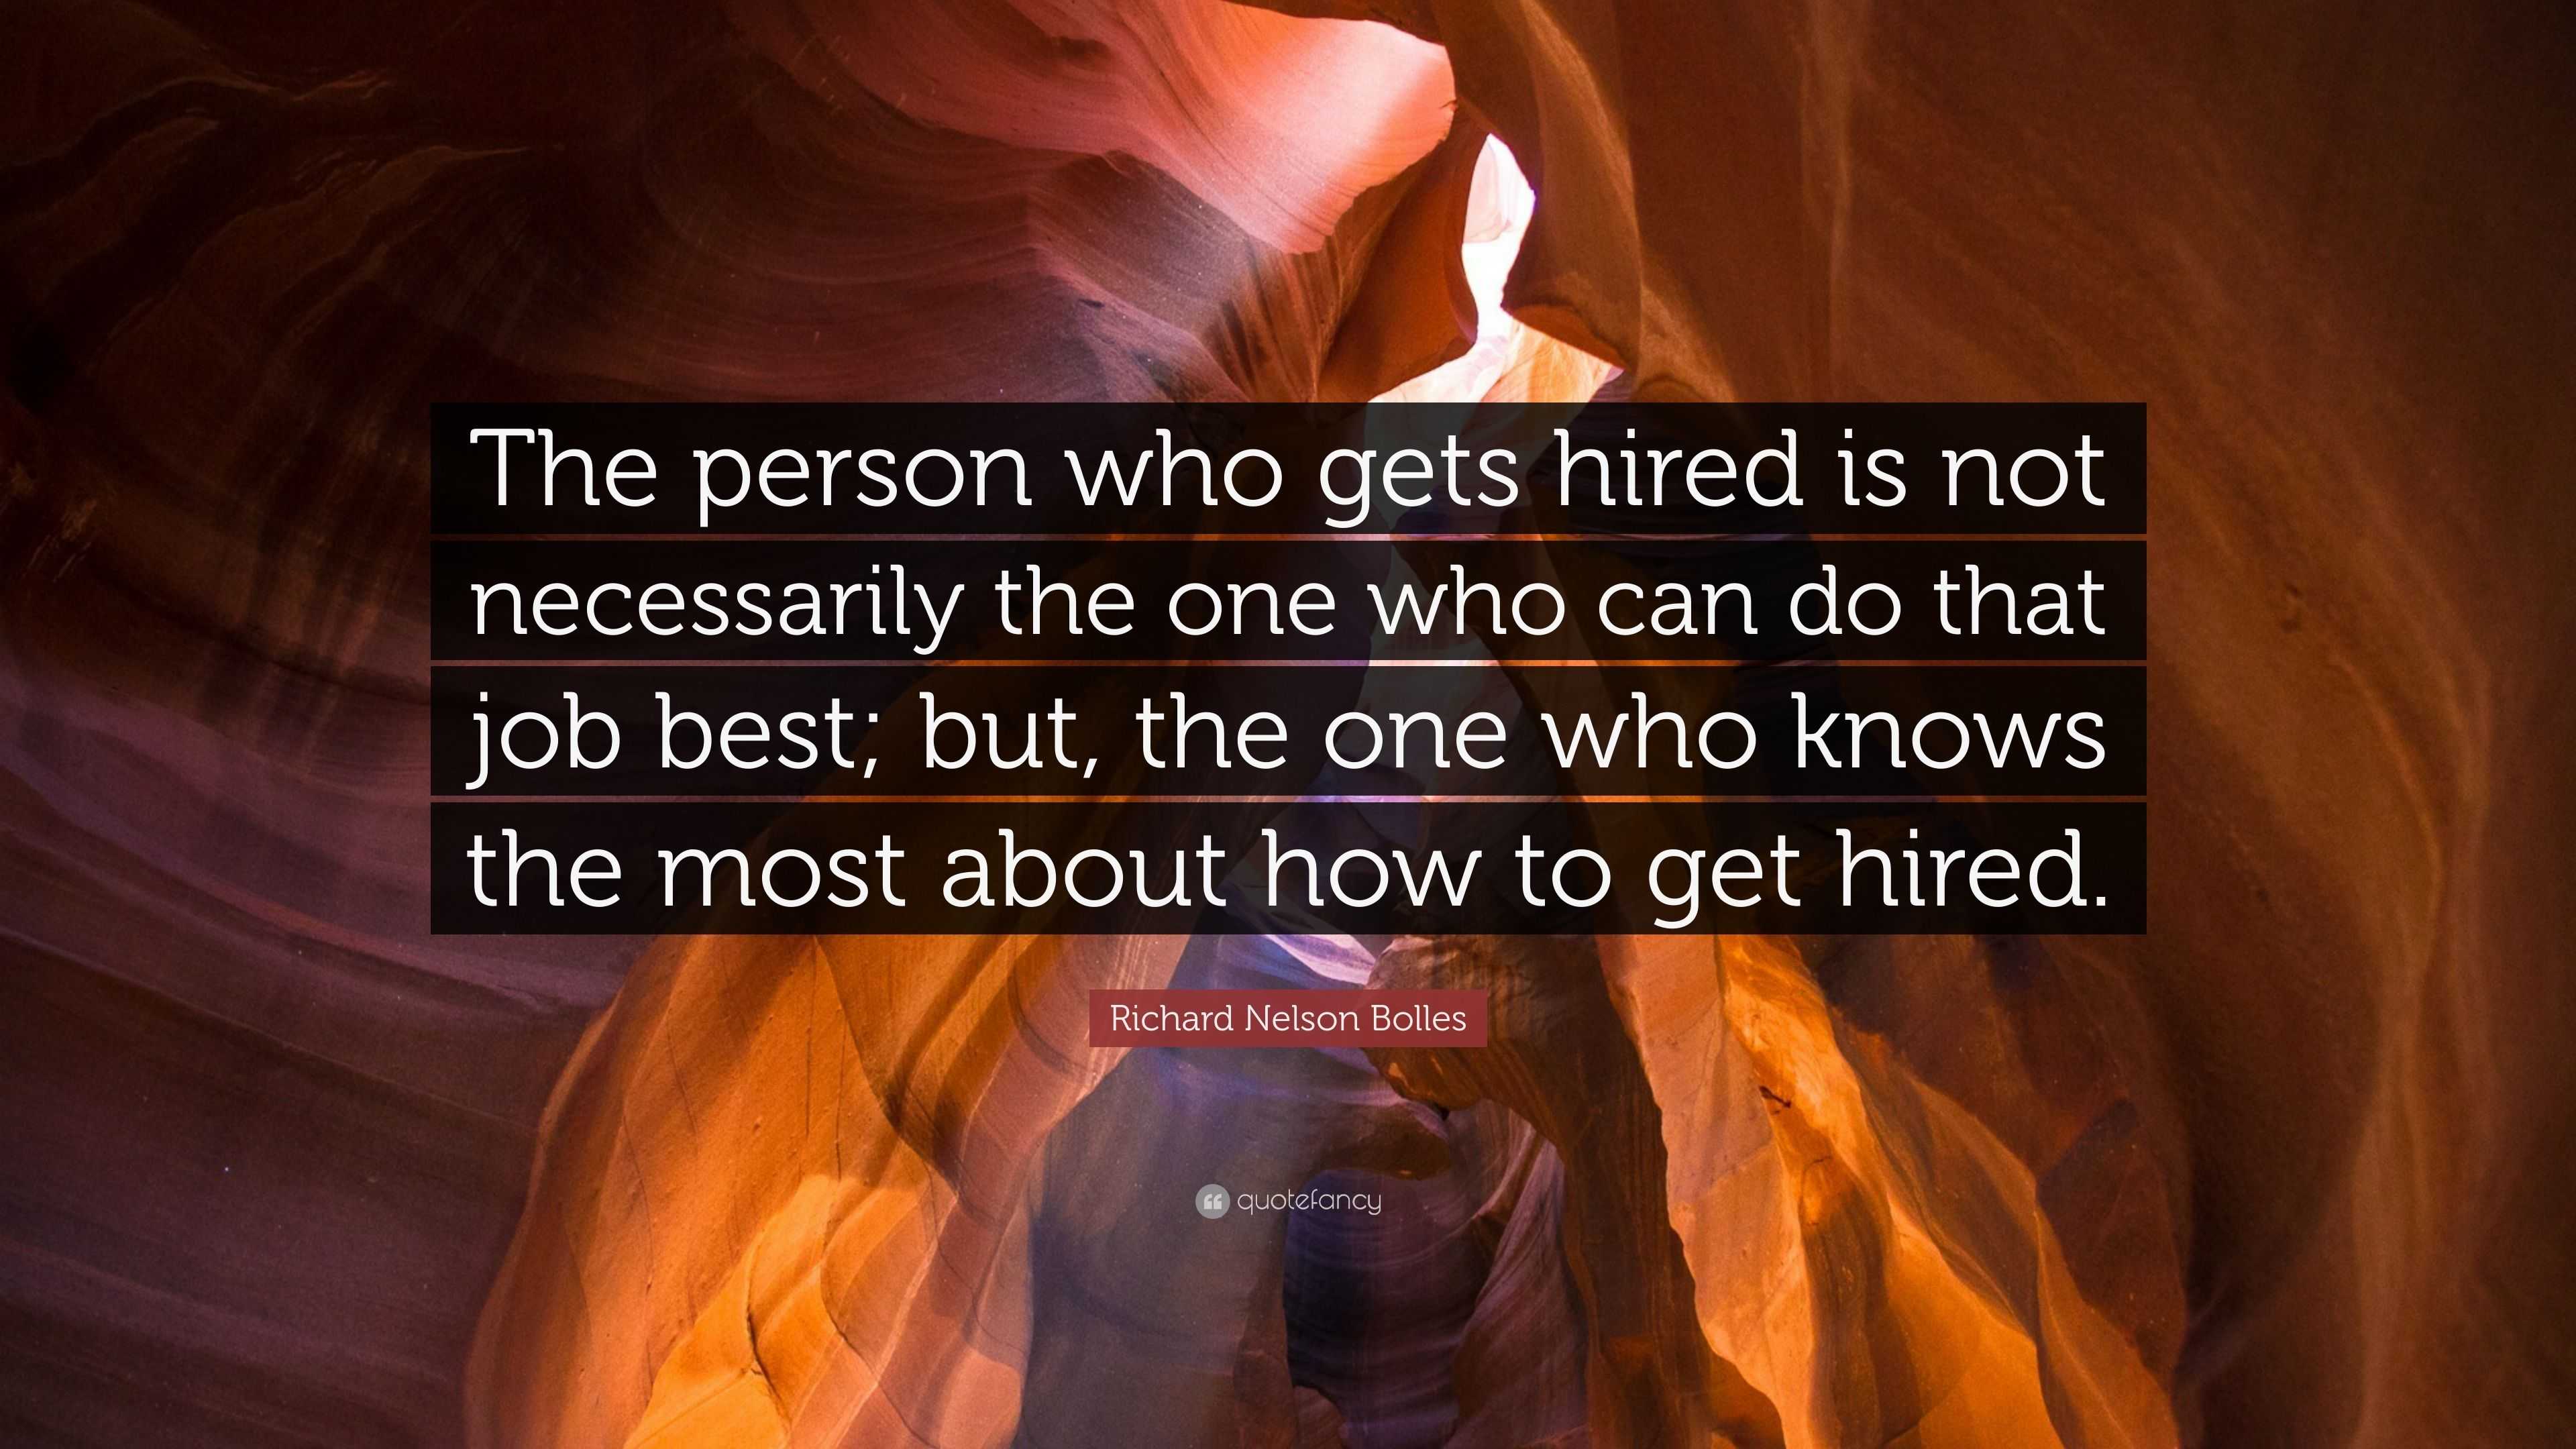 what happens with quotes on thumbtack that nobody gets hired